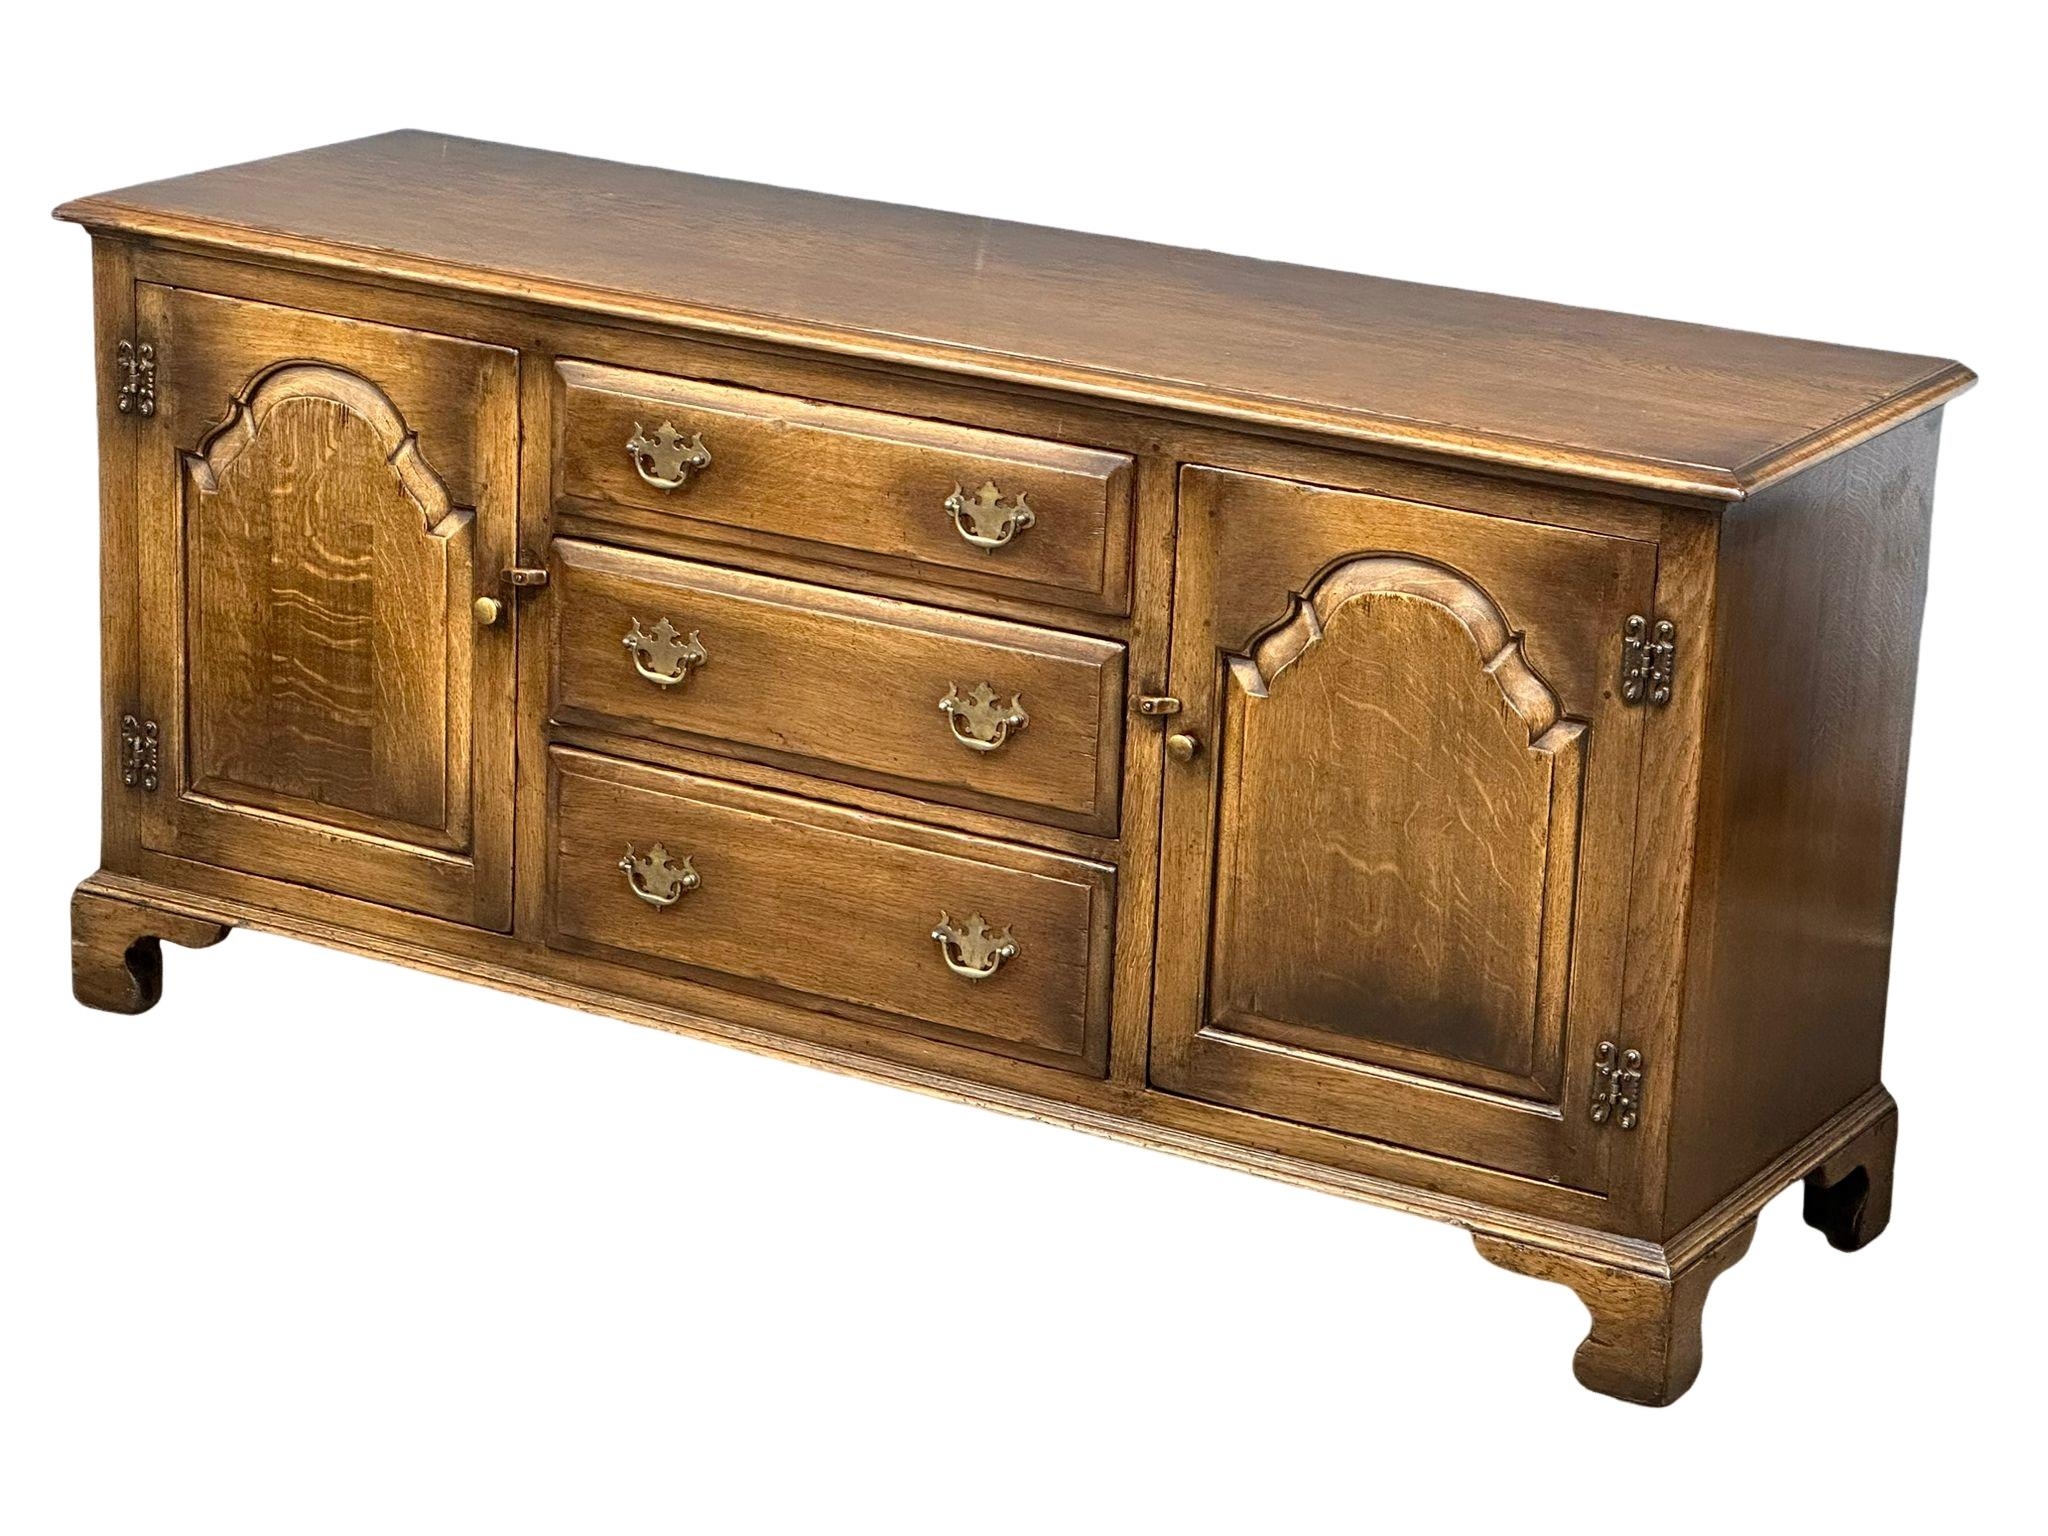 A large George III style Ipswich oak sideboard./dresser with 3 drawers and 2 cupboards. 166x52x79cm - Image 4 of 4